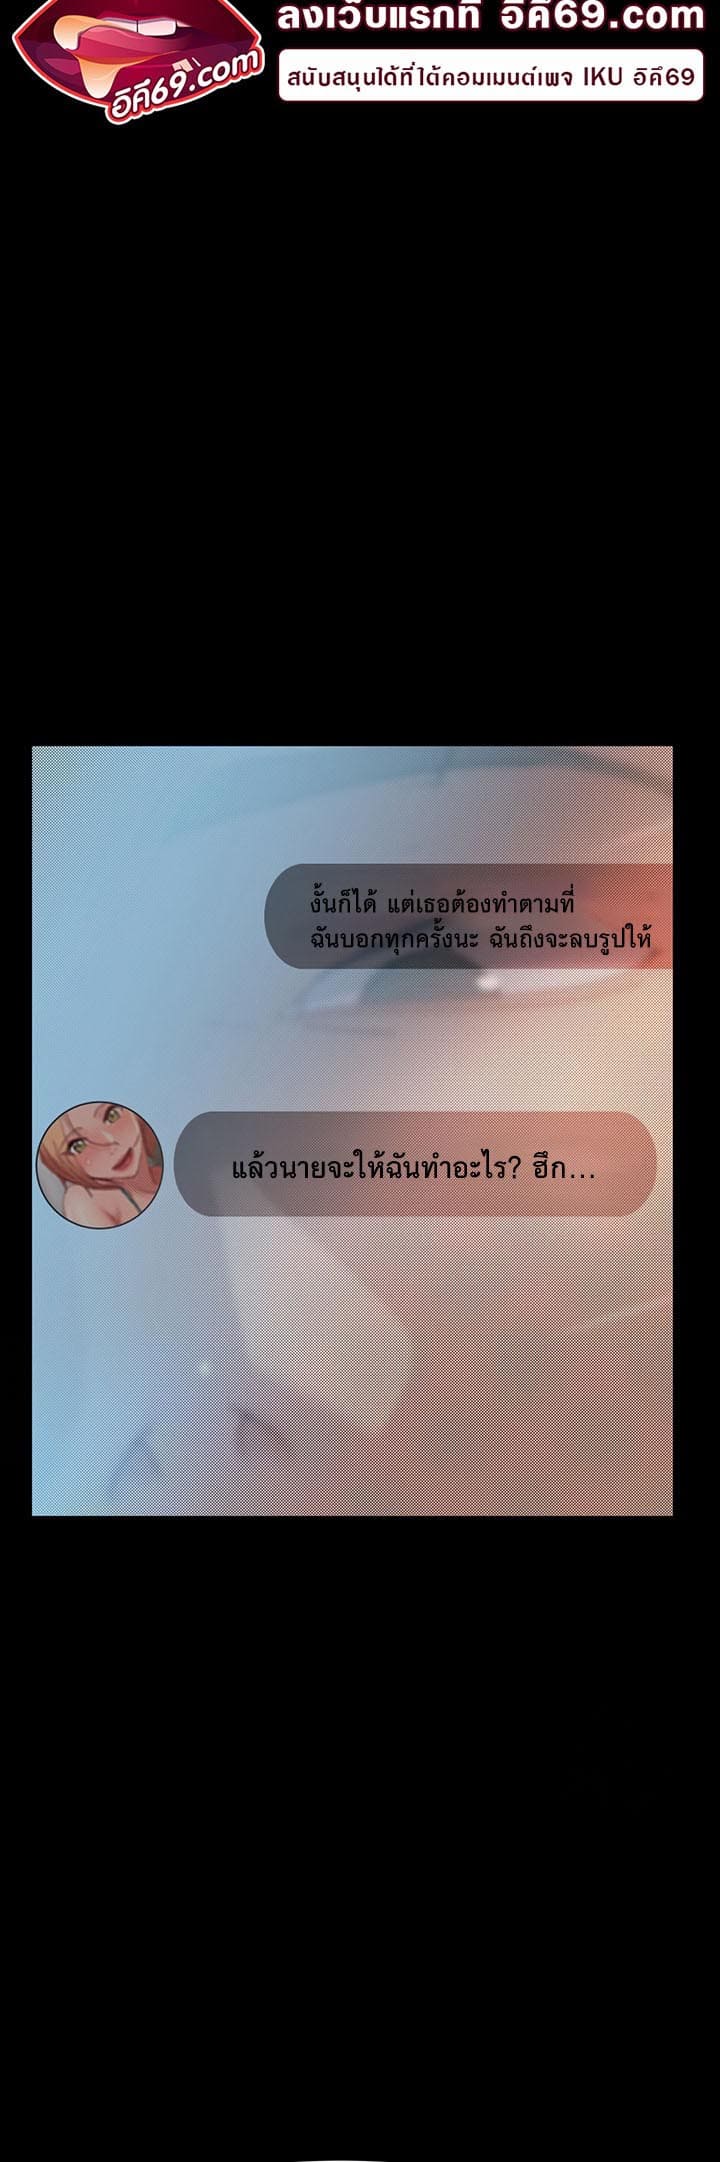 Marriage Agency Review ตอนที่ 27 ภาพ 9